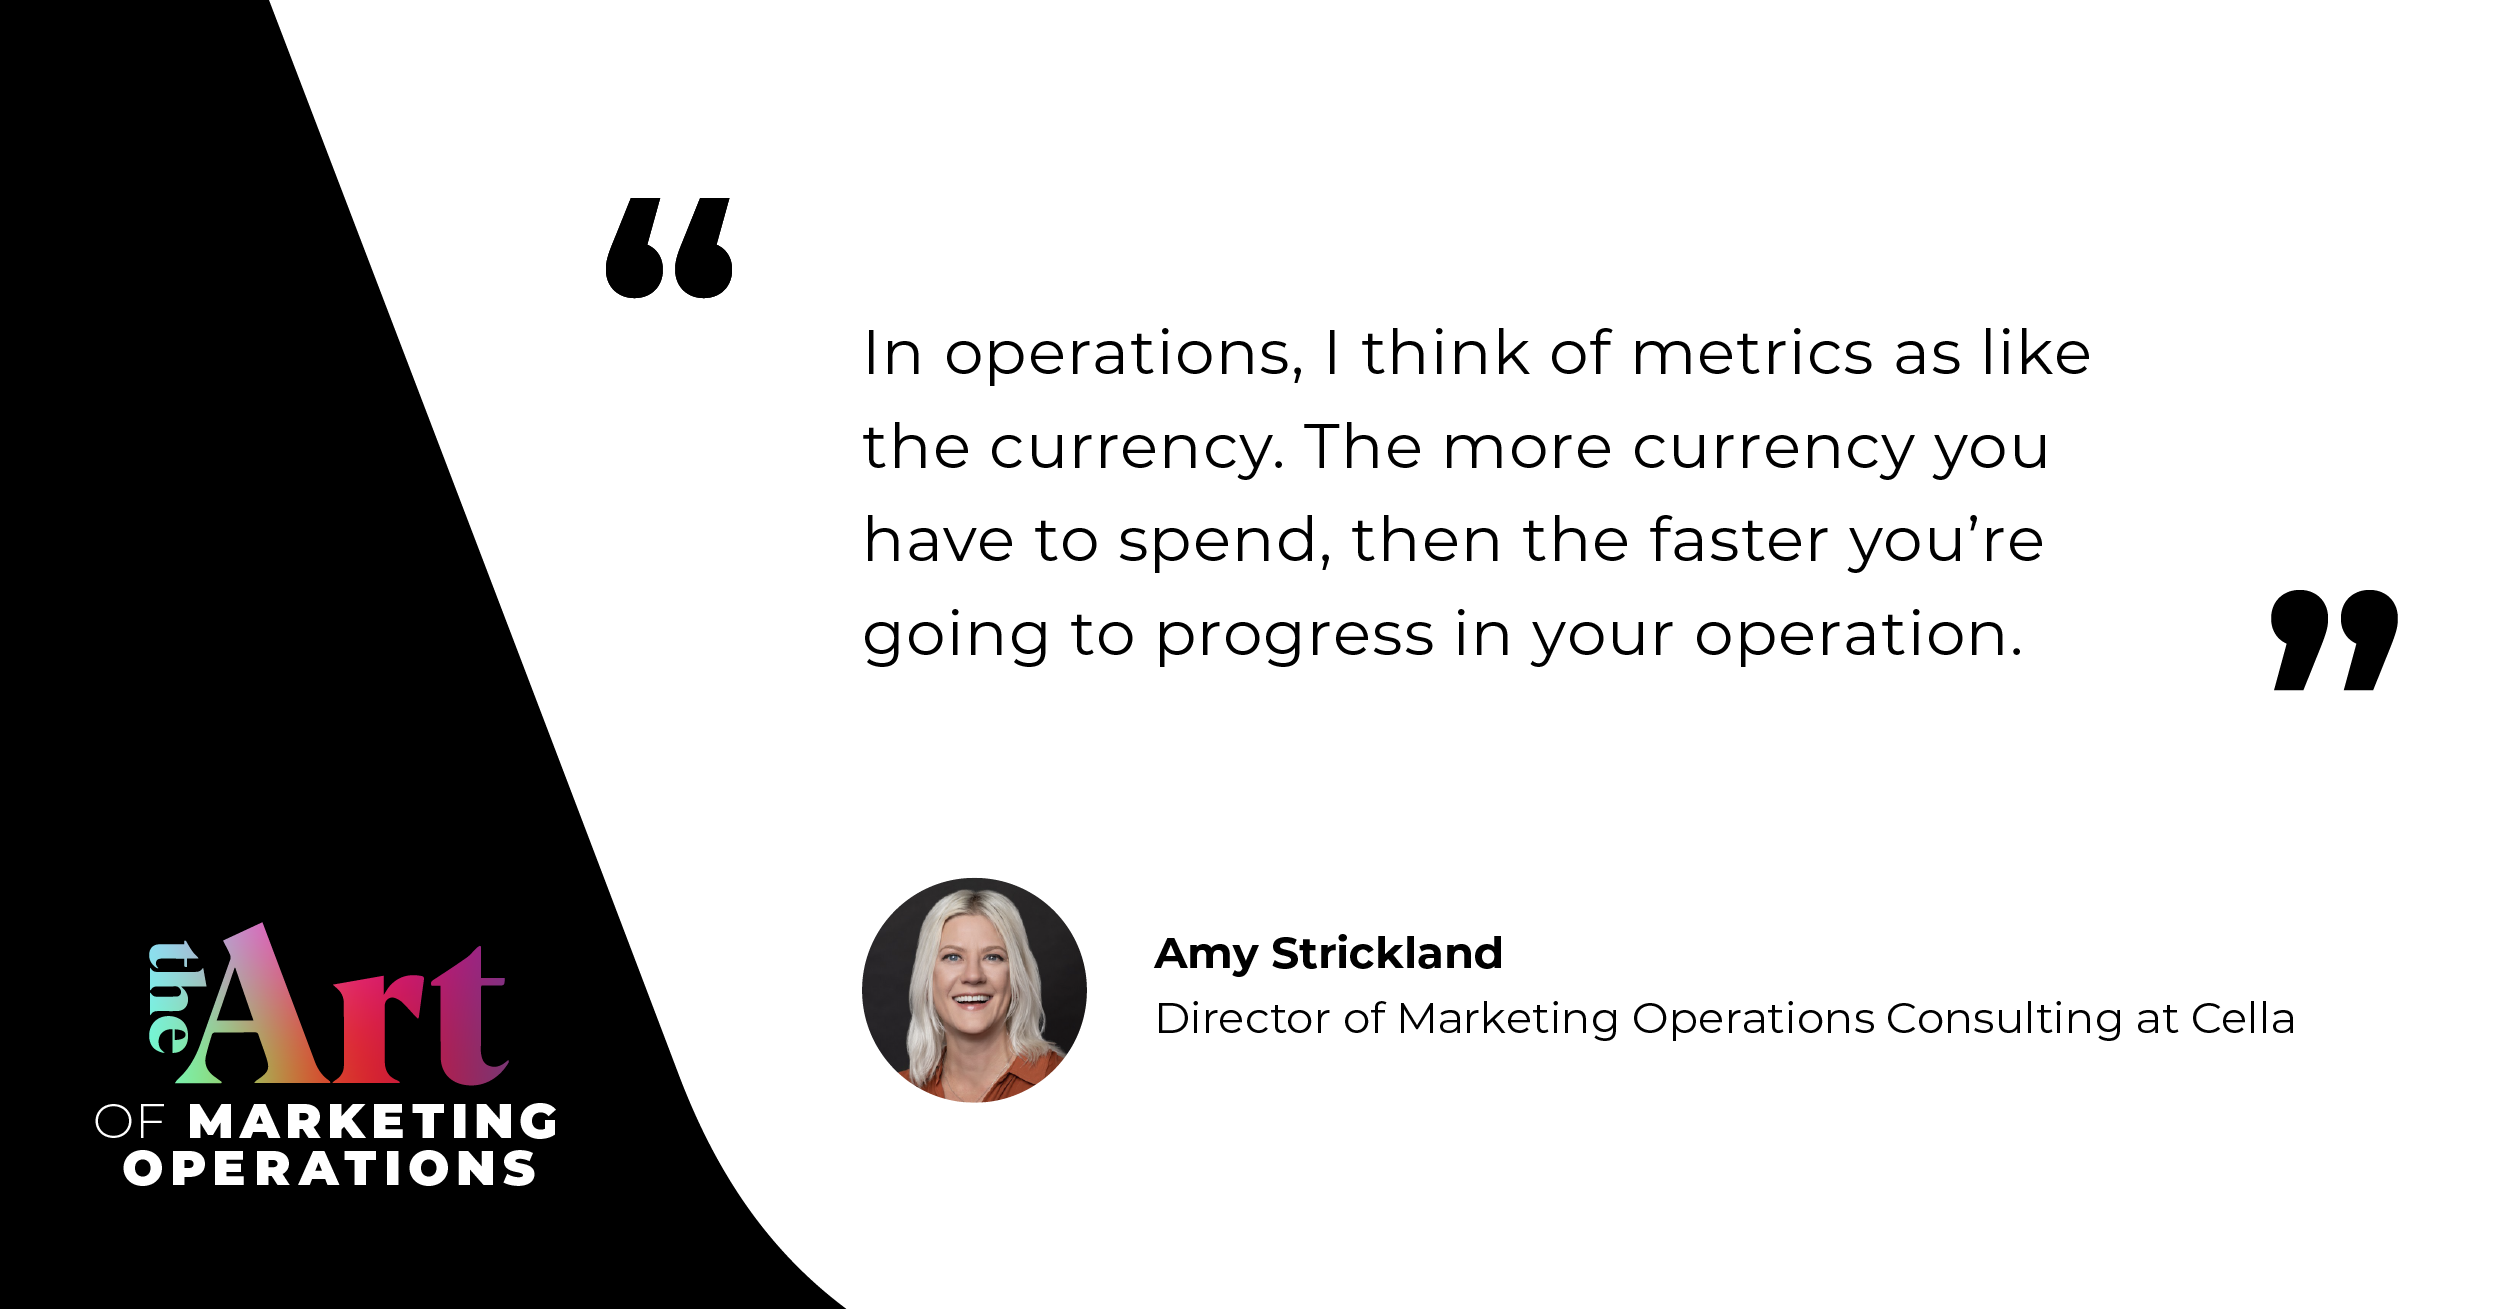 “In operations, I think of metrics as like the currency. The more currency you have to spend, then the faster you're going to progress in your operation.”  — Amy Strickland